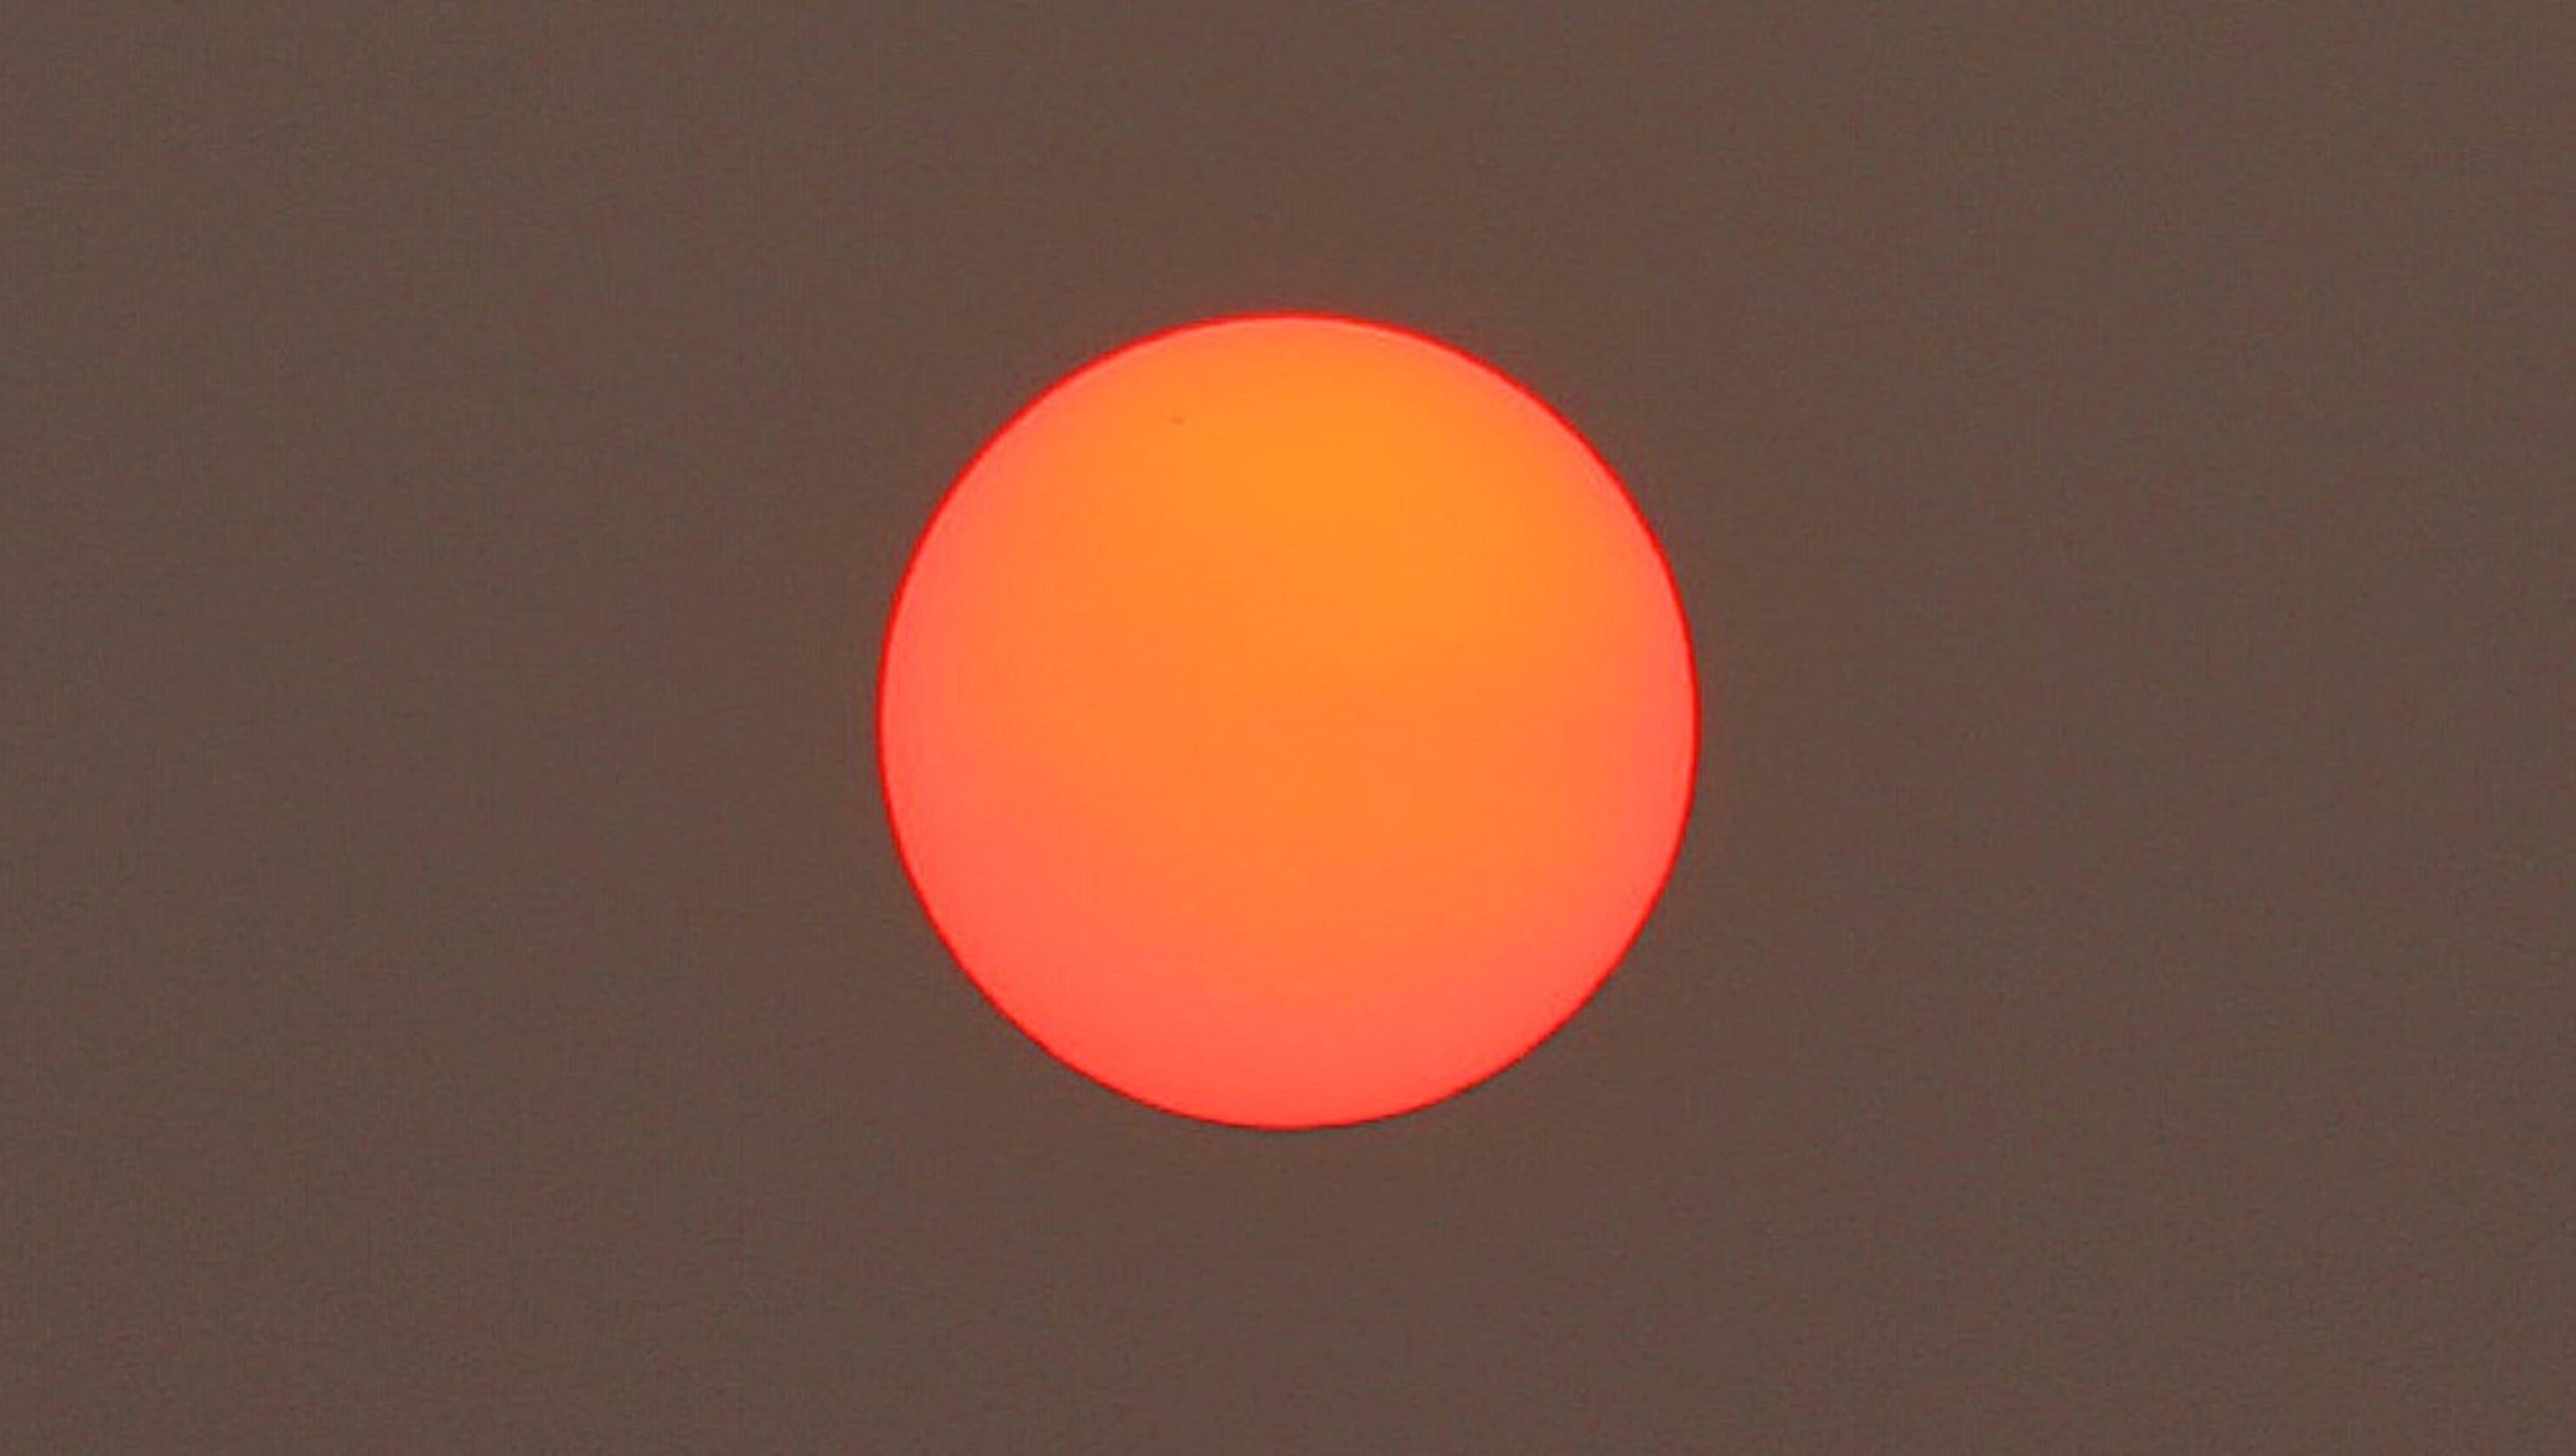 Meteorologist explains why the sun looks particularly red right now